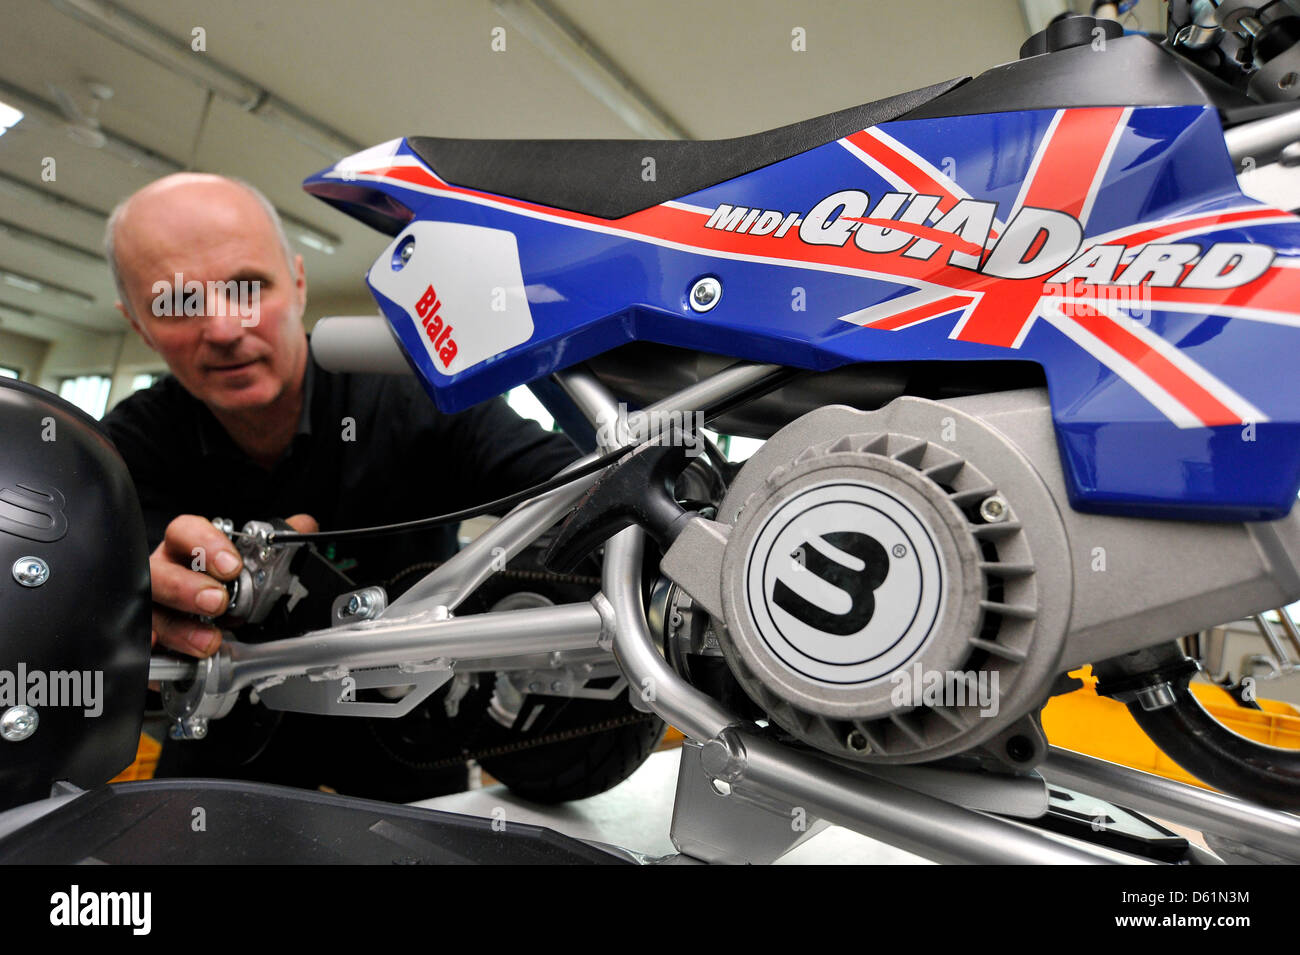 Blata, a Czech company, based in Blansko, that produces high performance,  mini moto bikes won a major contract in England. Blata will produce  thousands of special petrol engines per year. The company